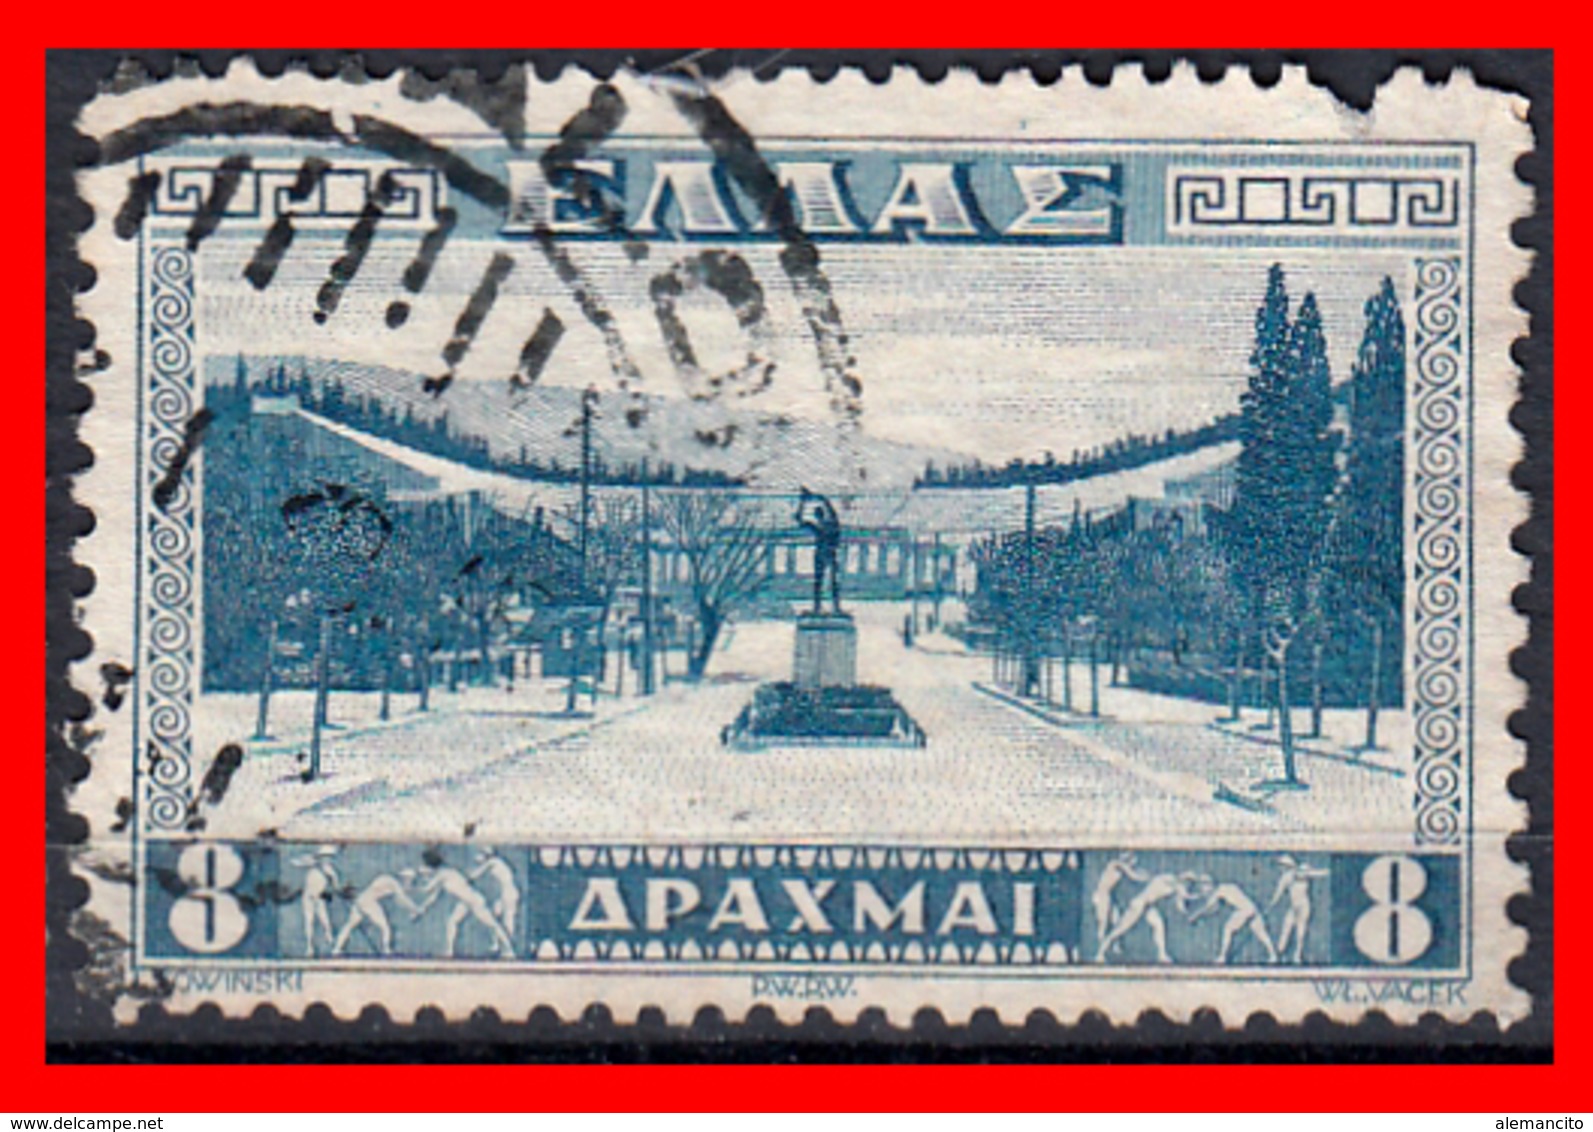 GRECIA - GREECE  SELLO 1934 APPROACH TO ATHENS STADIUM - Used Stamps